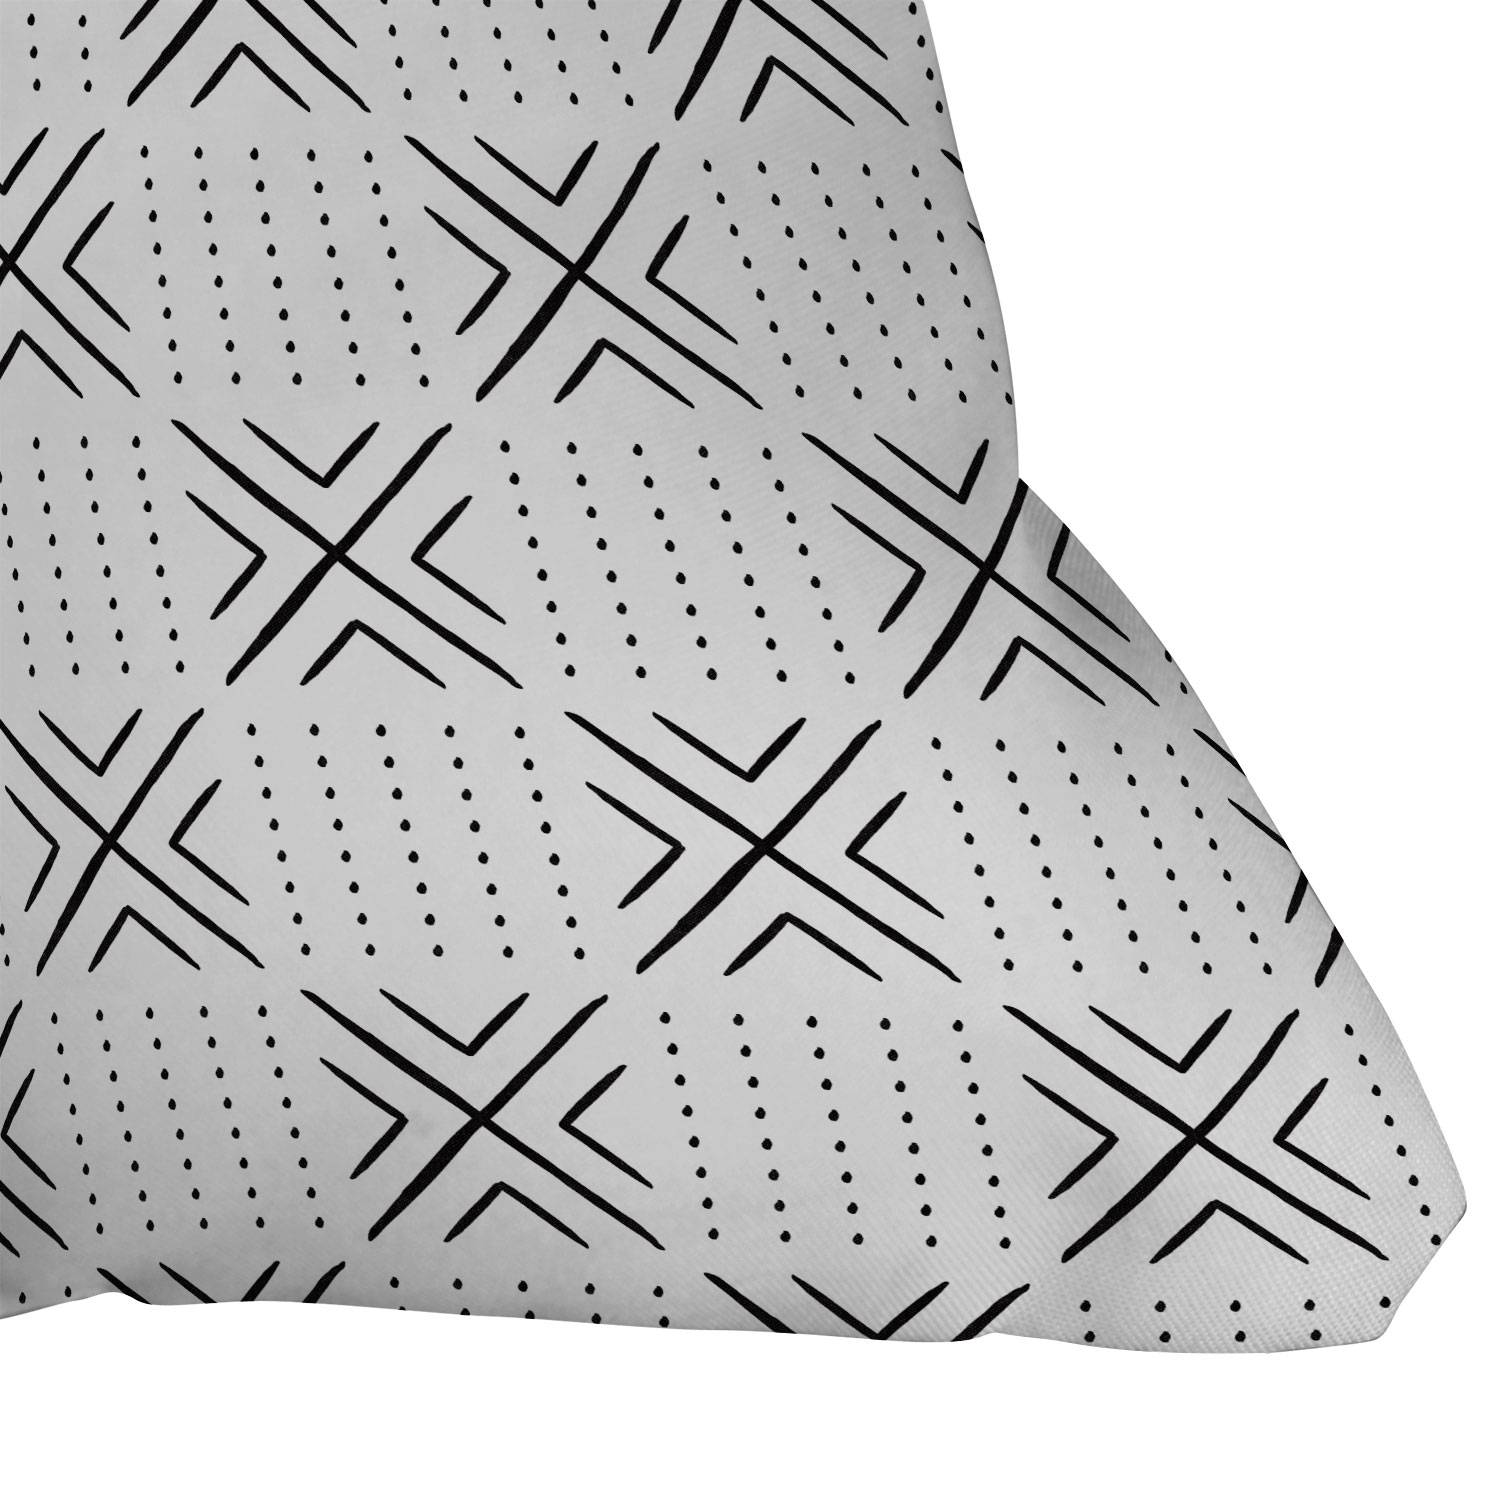 Mud Cloth Tile Black by Little Arrow Design Co - Outdoor Throw Pillow 20" x 20" - Image 2